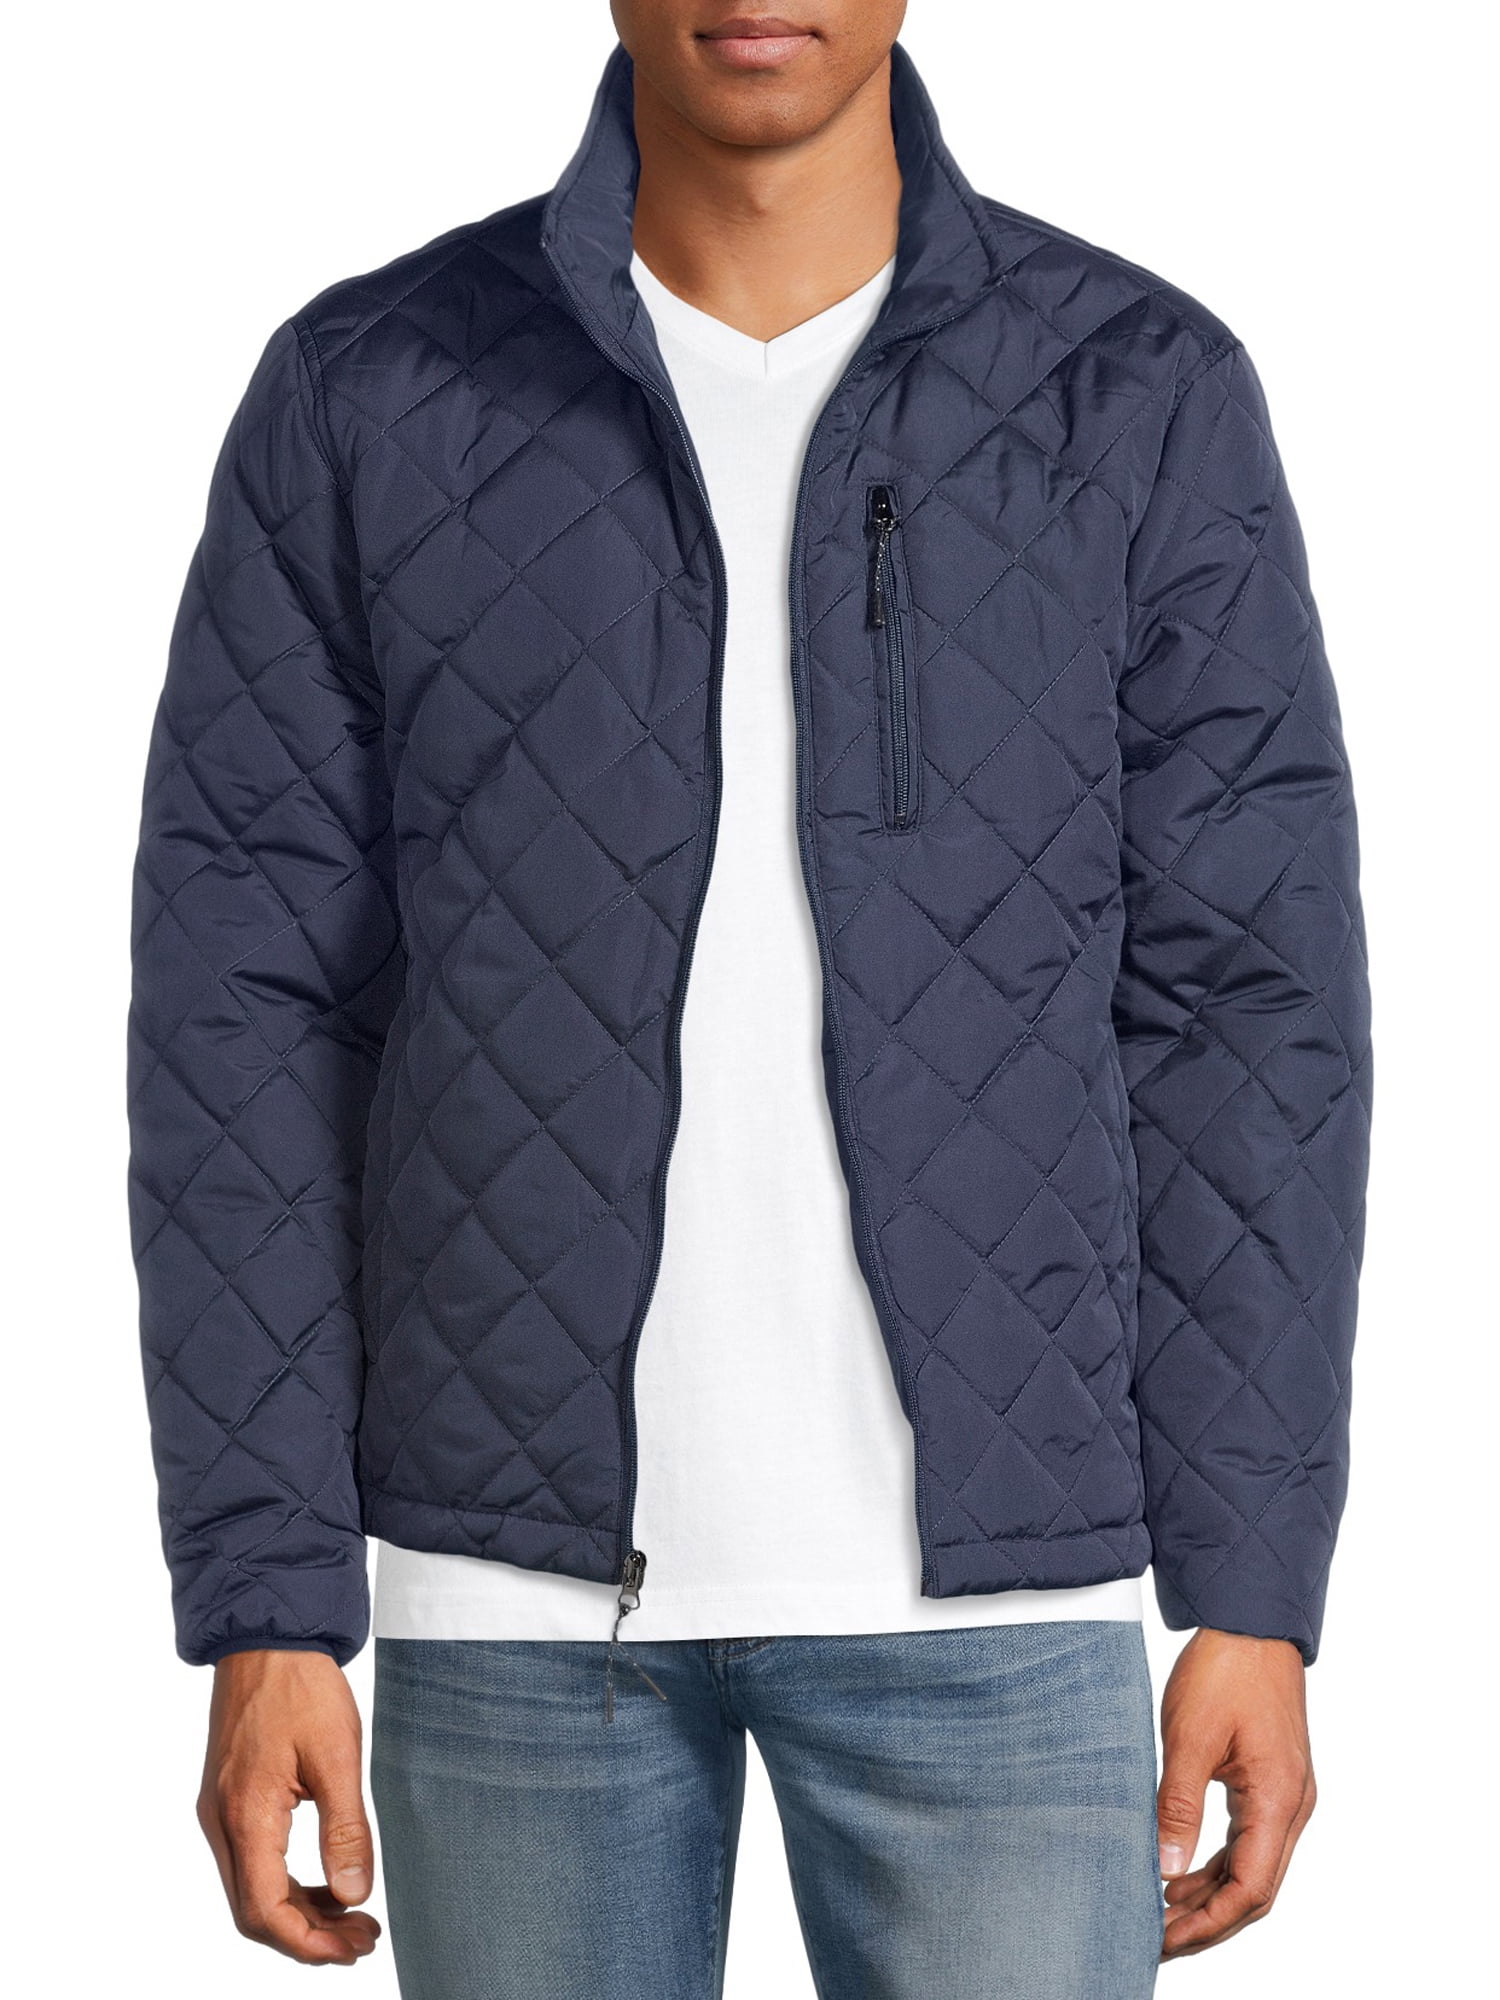 Wantdo Mens Quilted Puffer Jacket Warm Windproof Stand Collar Diamond ...